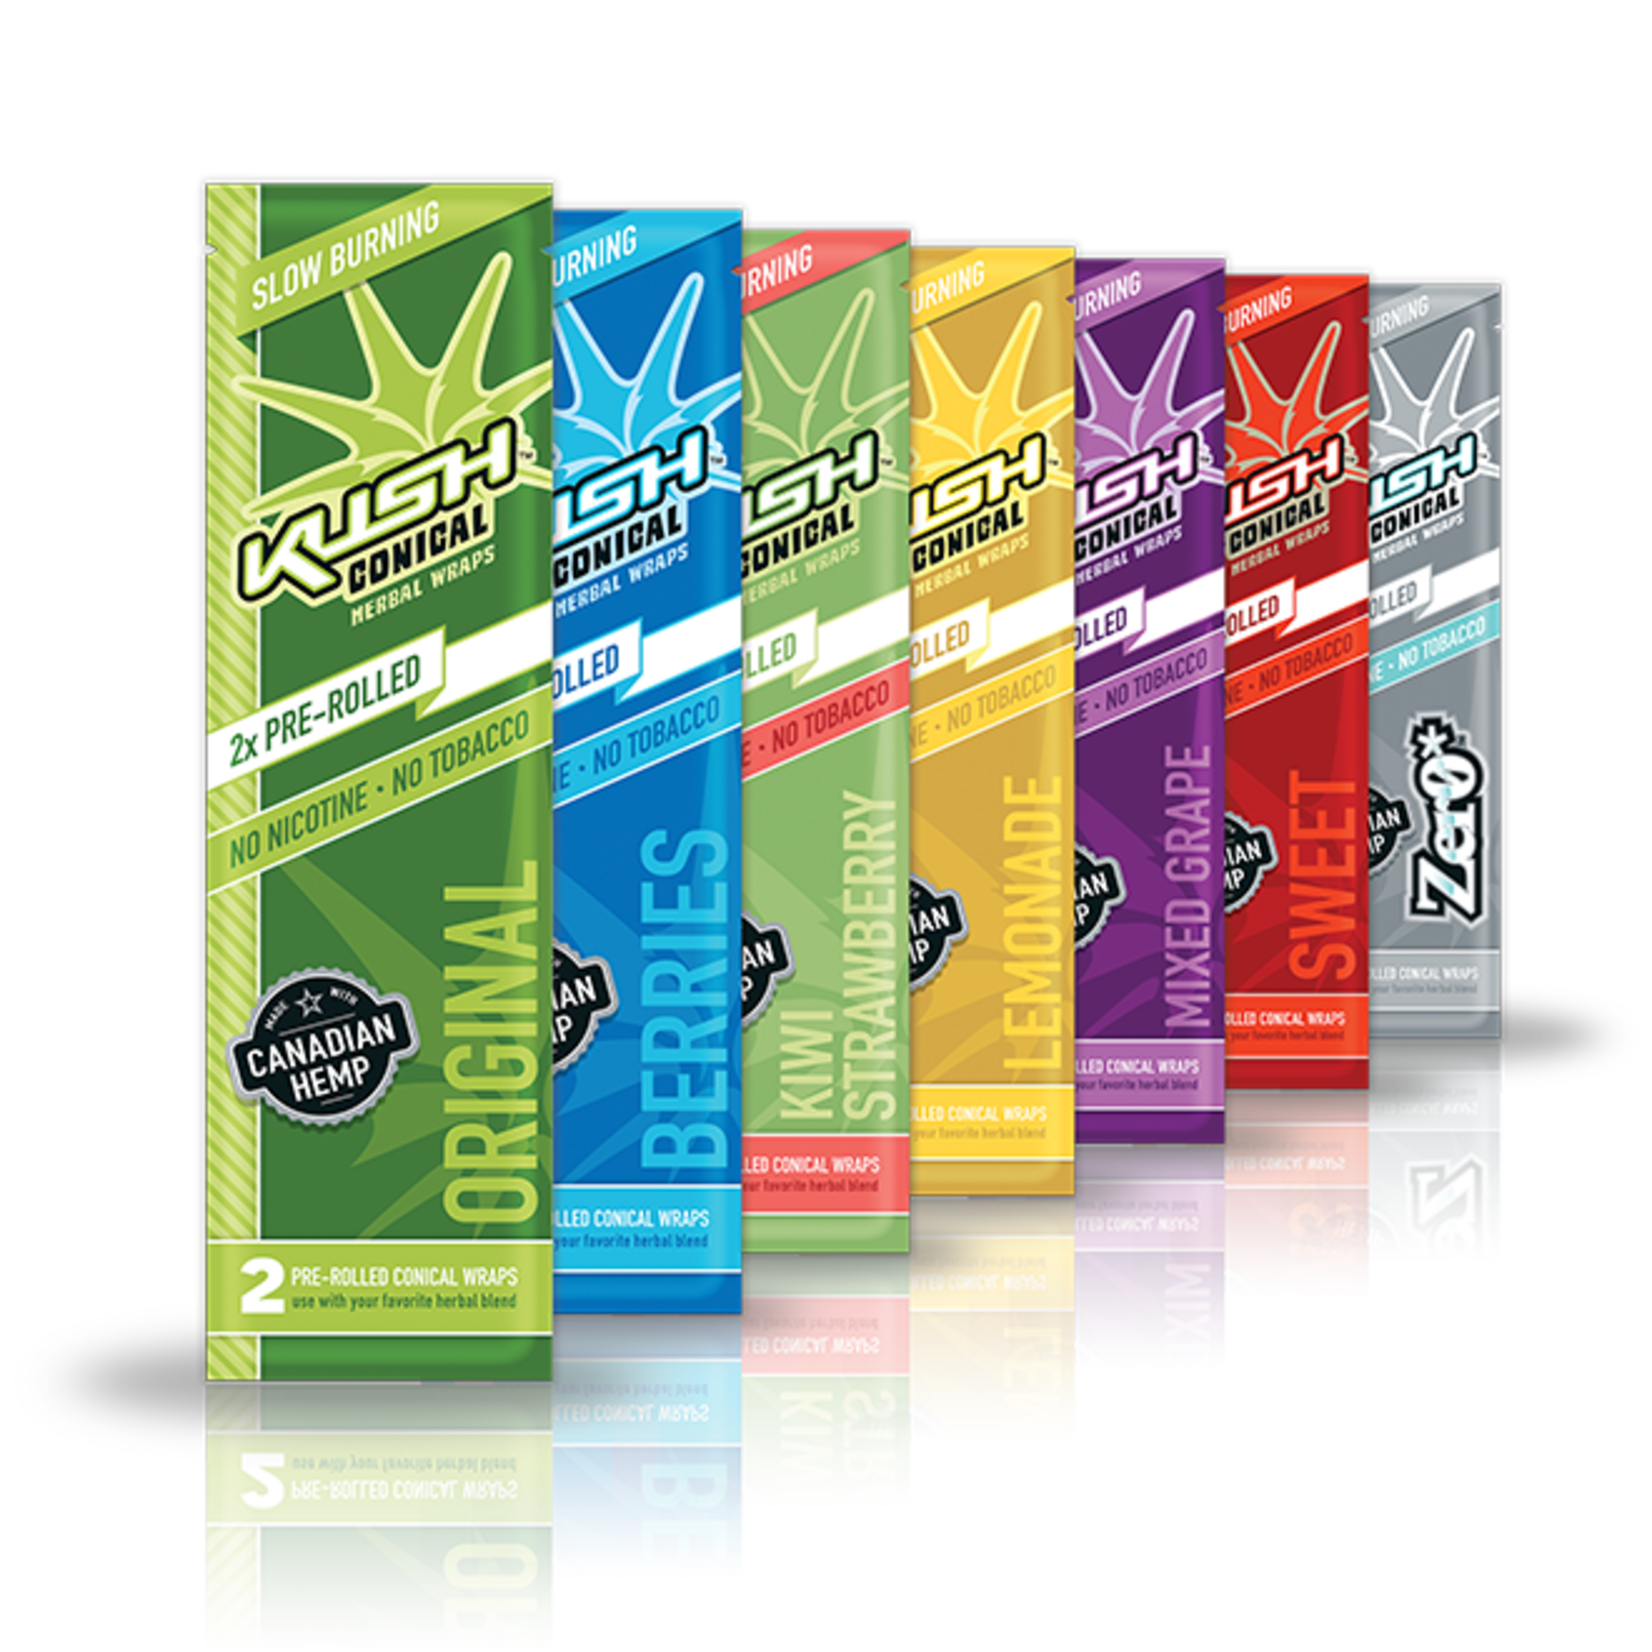 Kush Conical Herbal Wraps: 2 Pre-Rolled Conical Wraps